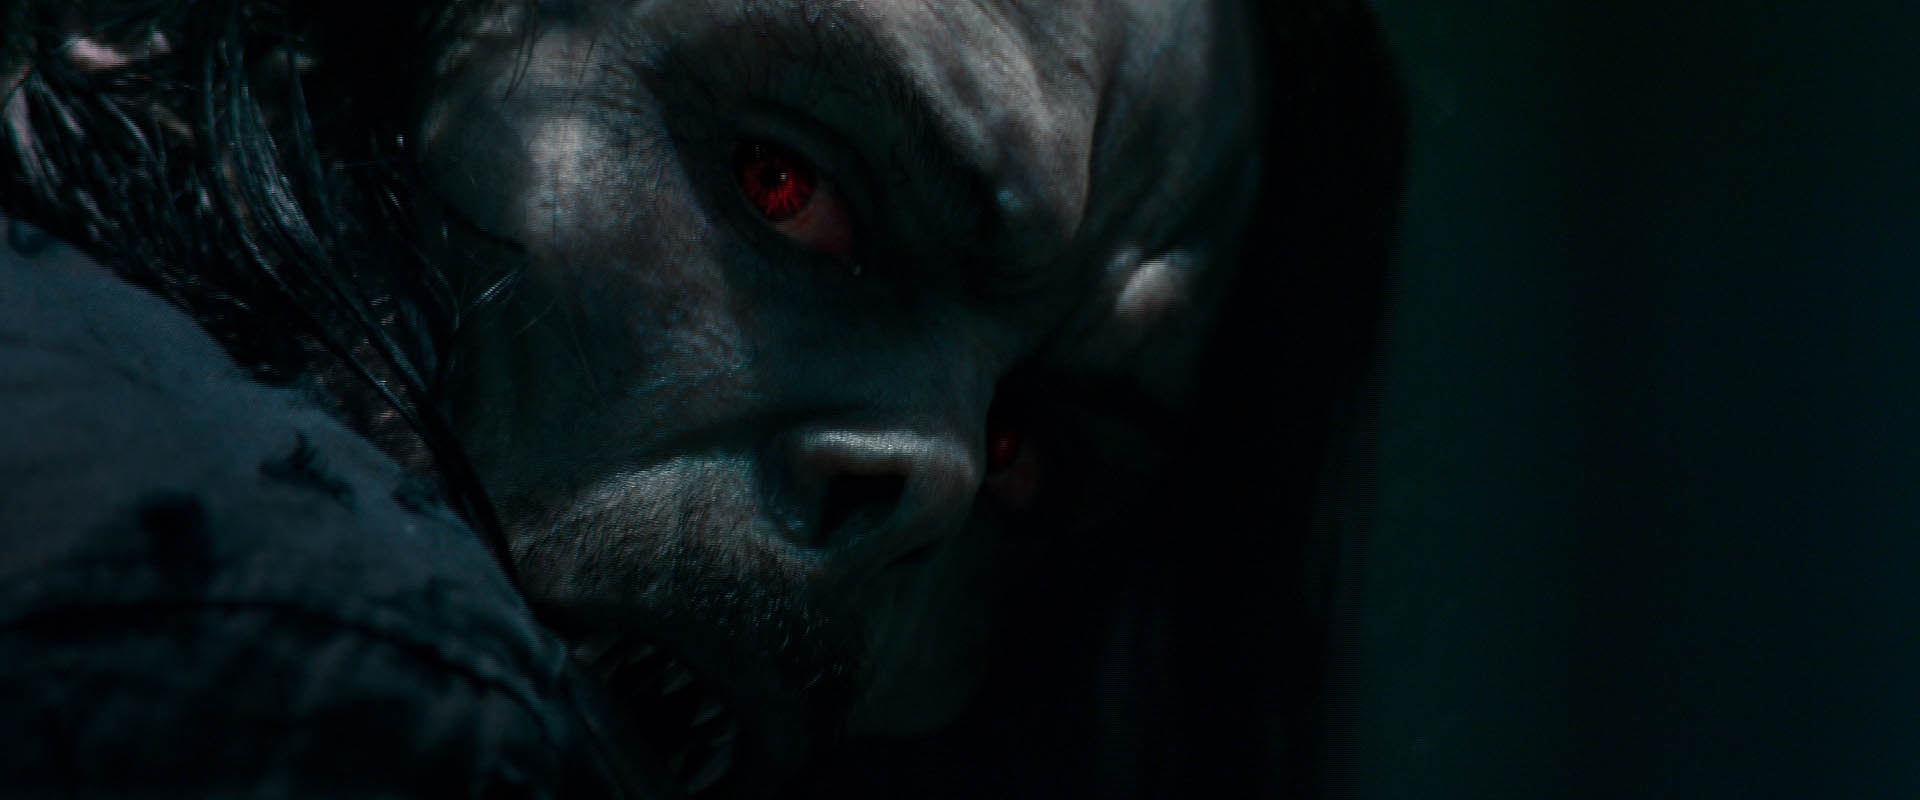 Morbius trailer - Let the confusion begin | The Nerdy